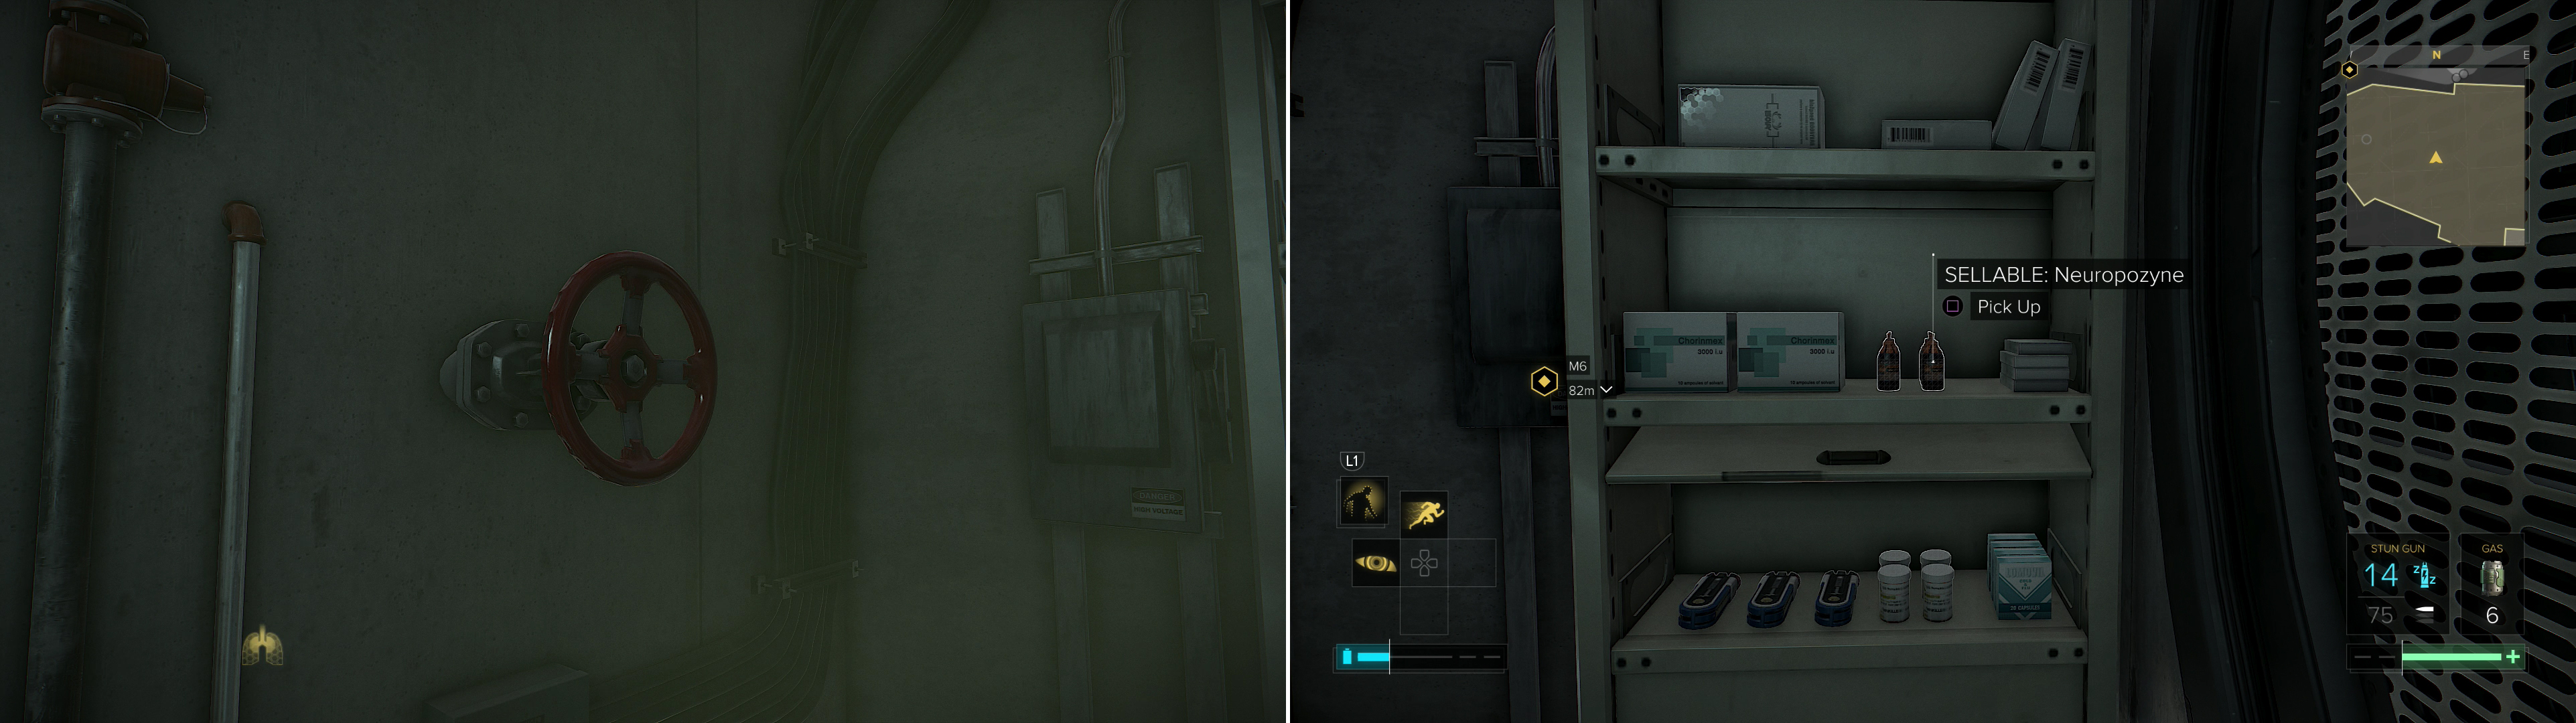 If you have the Implanted Rebreather augmentation you can climb through a vent and turn off a gas valve (left), which will allow you to score a great deal of valuable loot at your leisure (right).